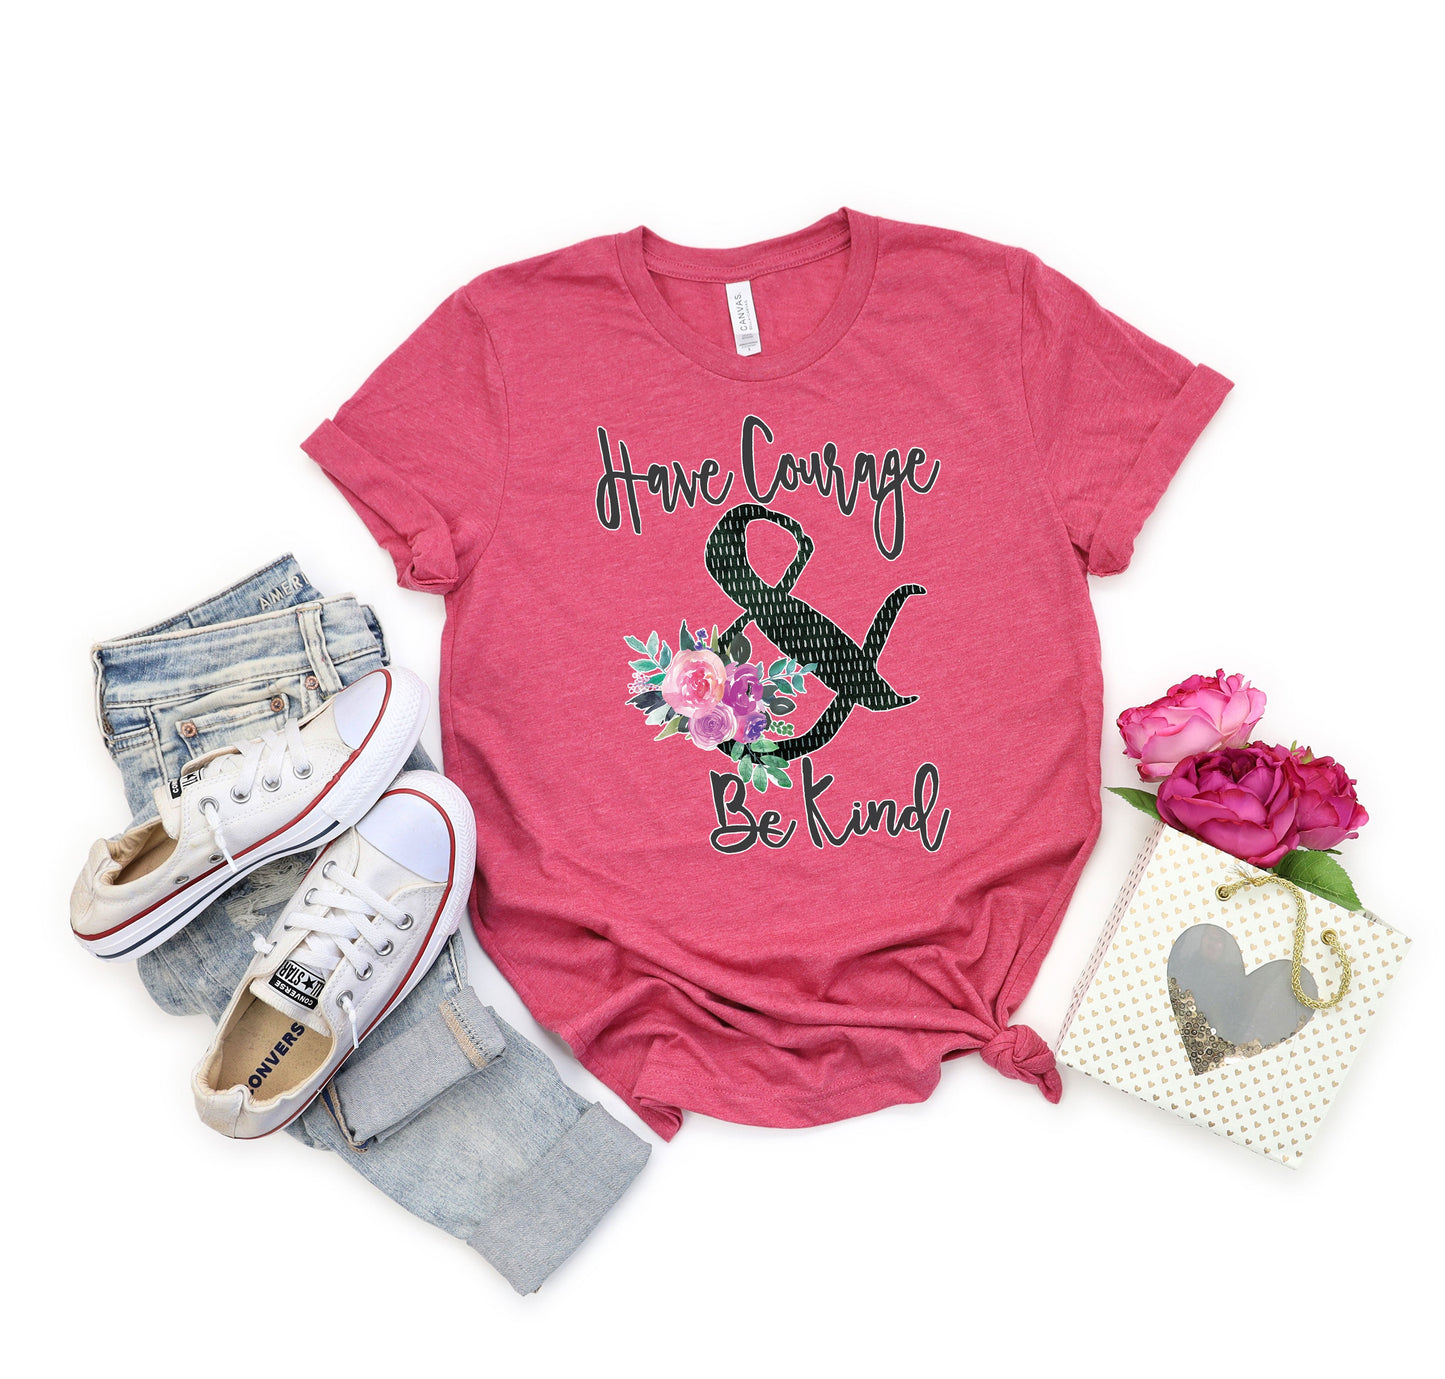 Inspirational T-Shirt, Have Courage & Be Kind Tee